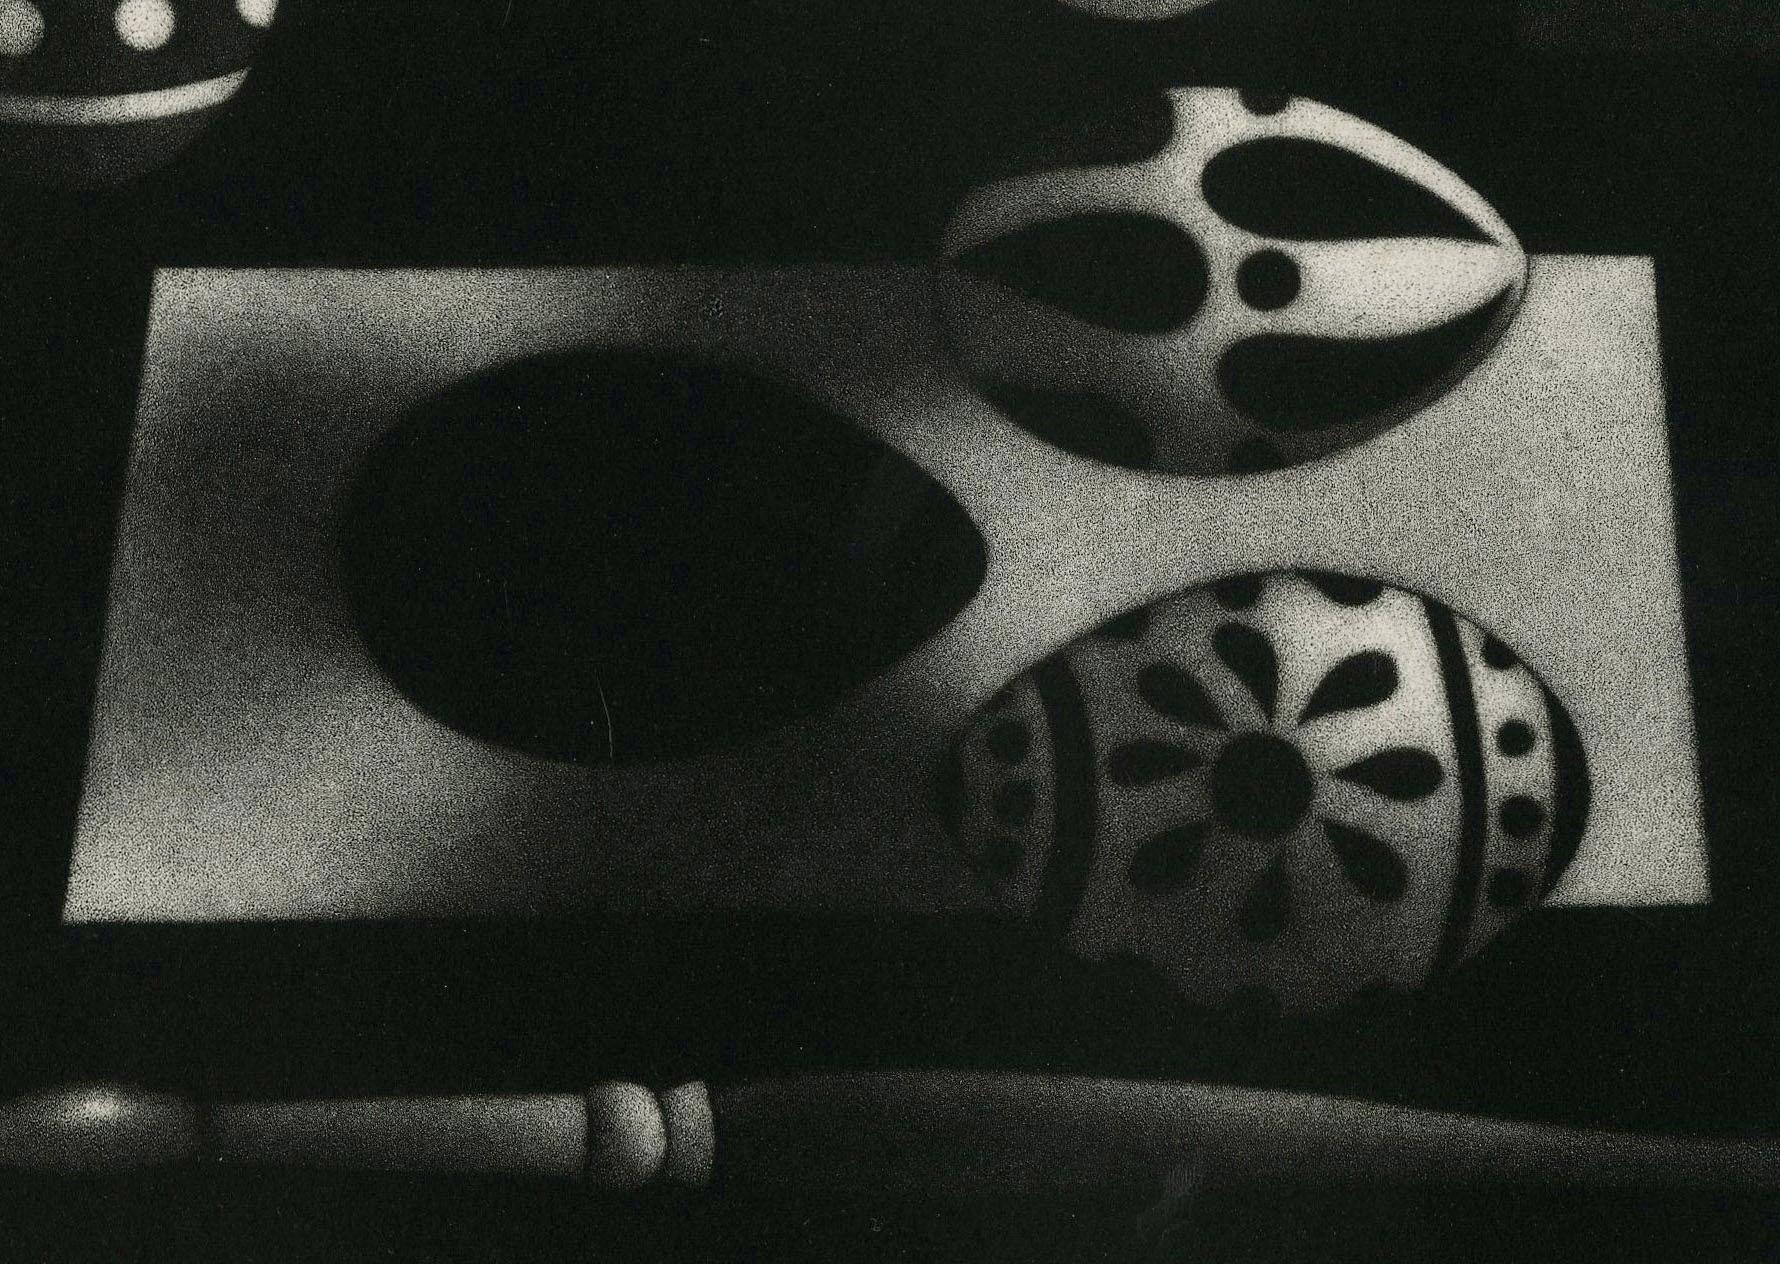 Des Oeufs Pout Ta Fette
(Holiday Eggs)
Mezzotint, 1960
Signed, dated, titled and numbered in pencil
Edition: 50 (33/50)
Image: 8 5/8 x 10 11/16